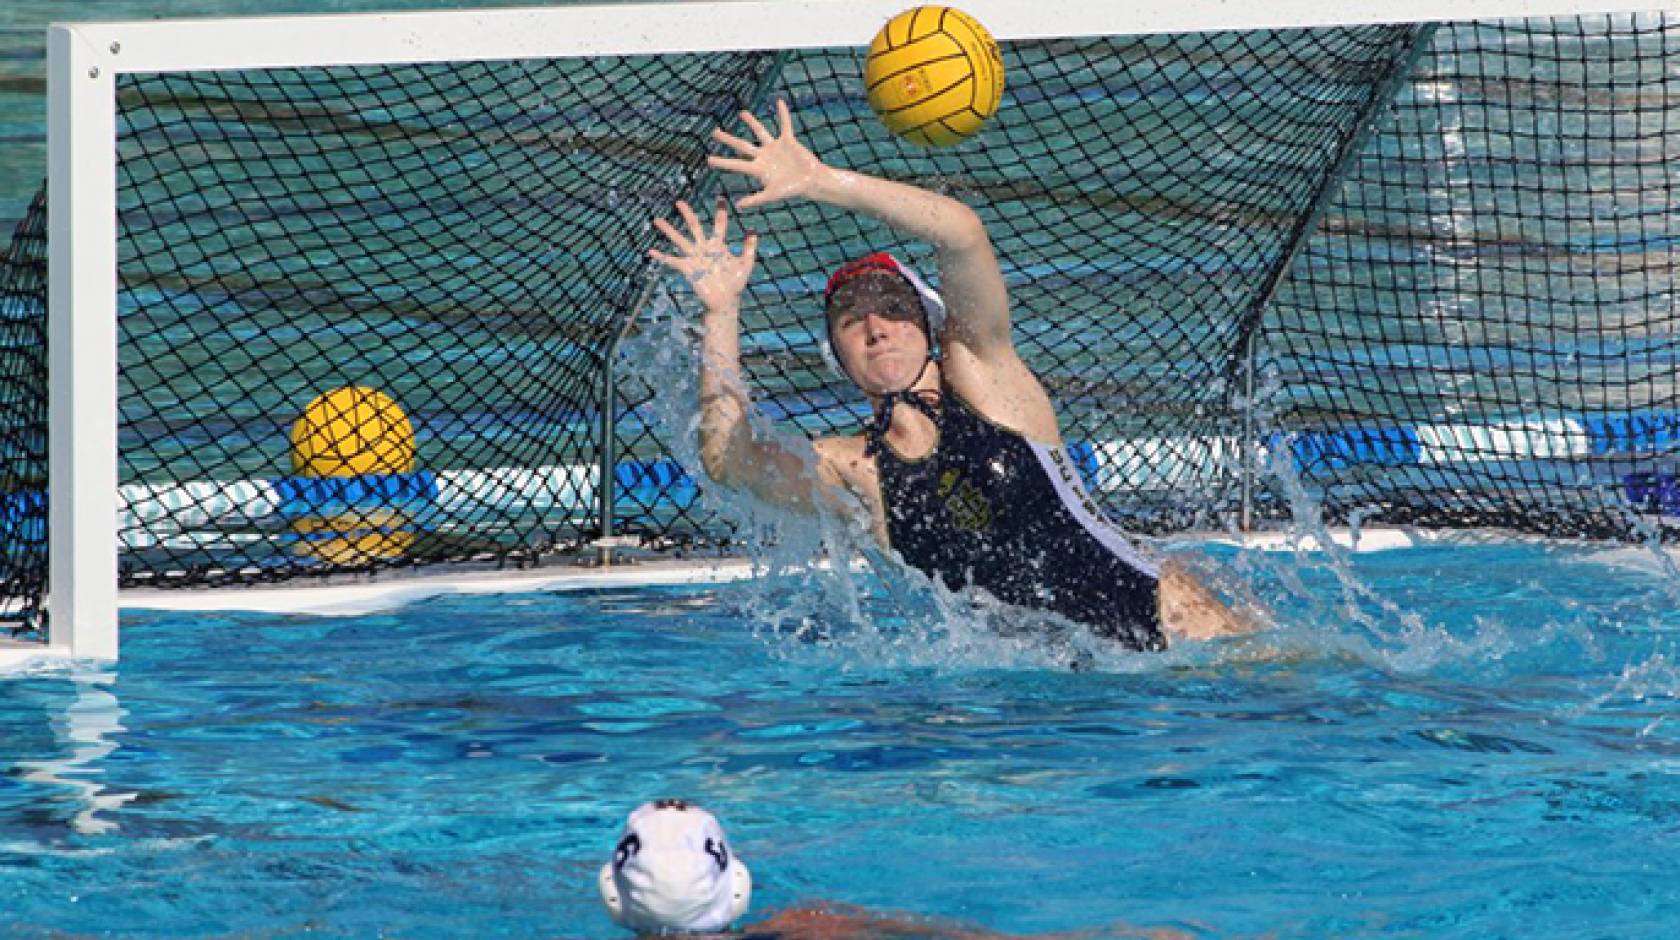 A UC Irvine poll found that water polo goalies experienced more concussions than other players, especially during practice sessions. 